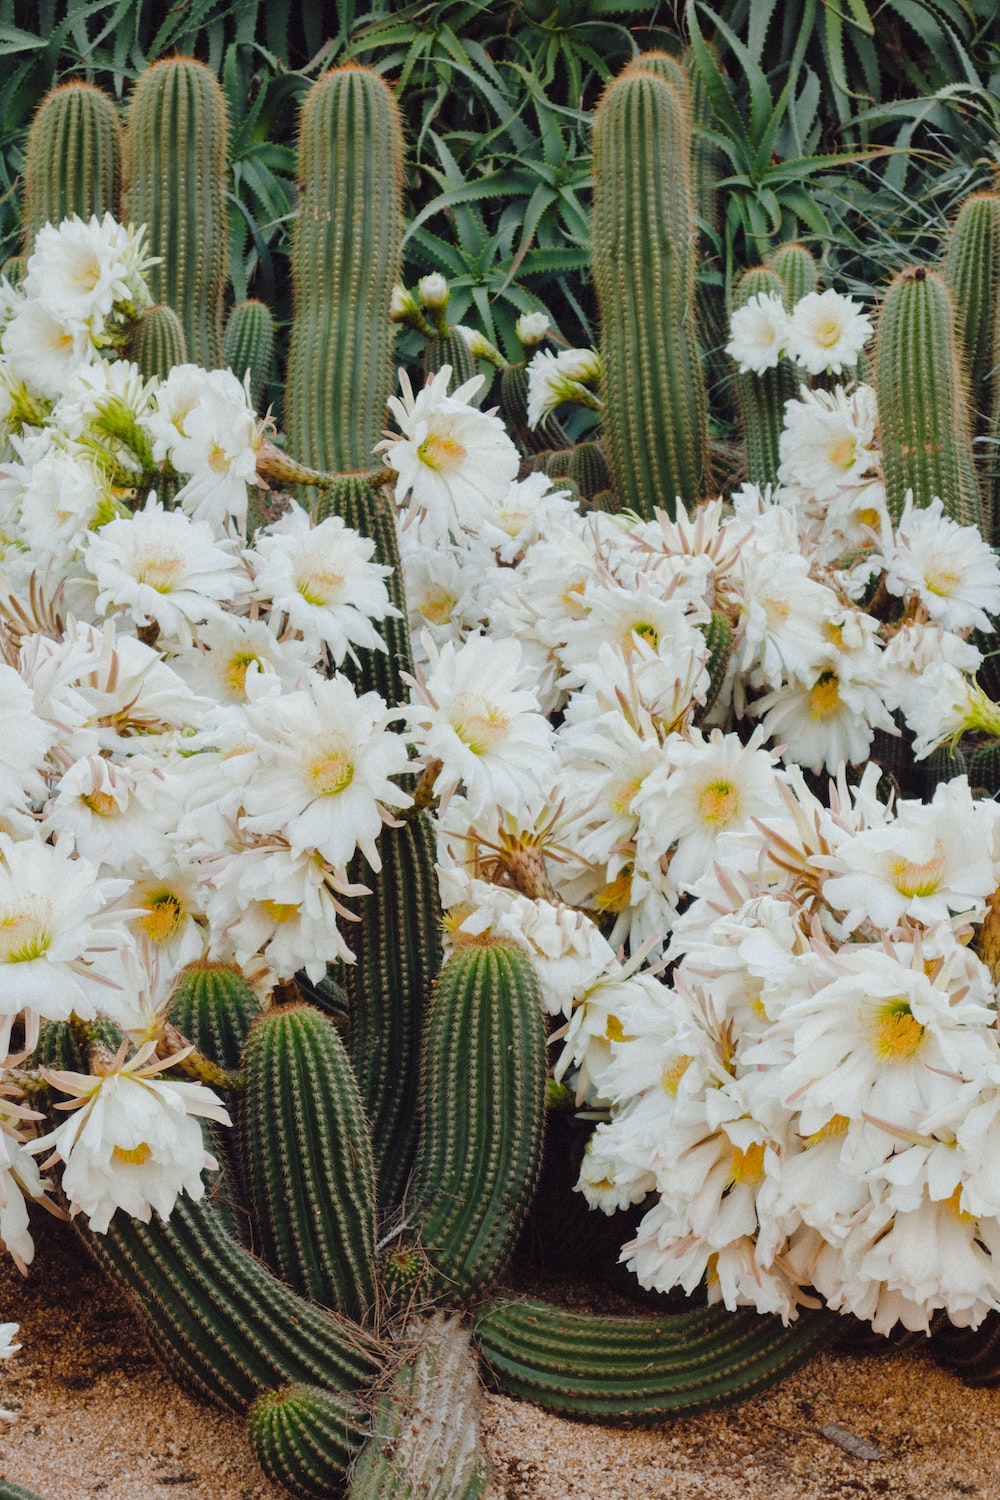 Cactus Flower Picture. Download Free Image